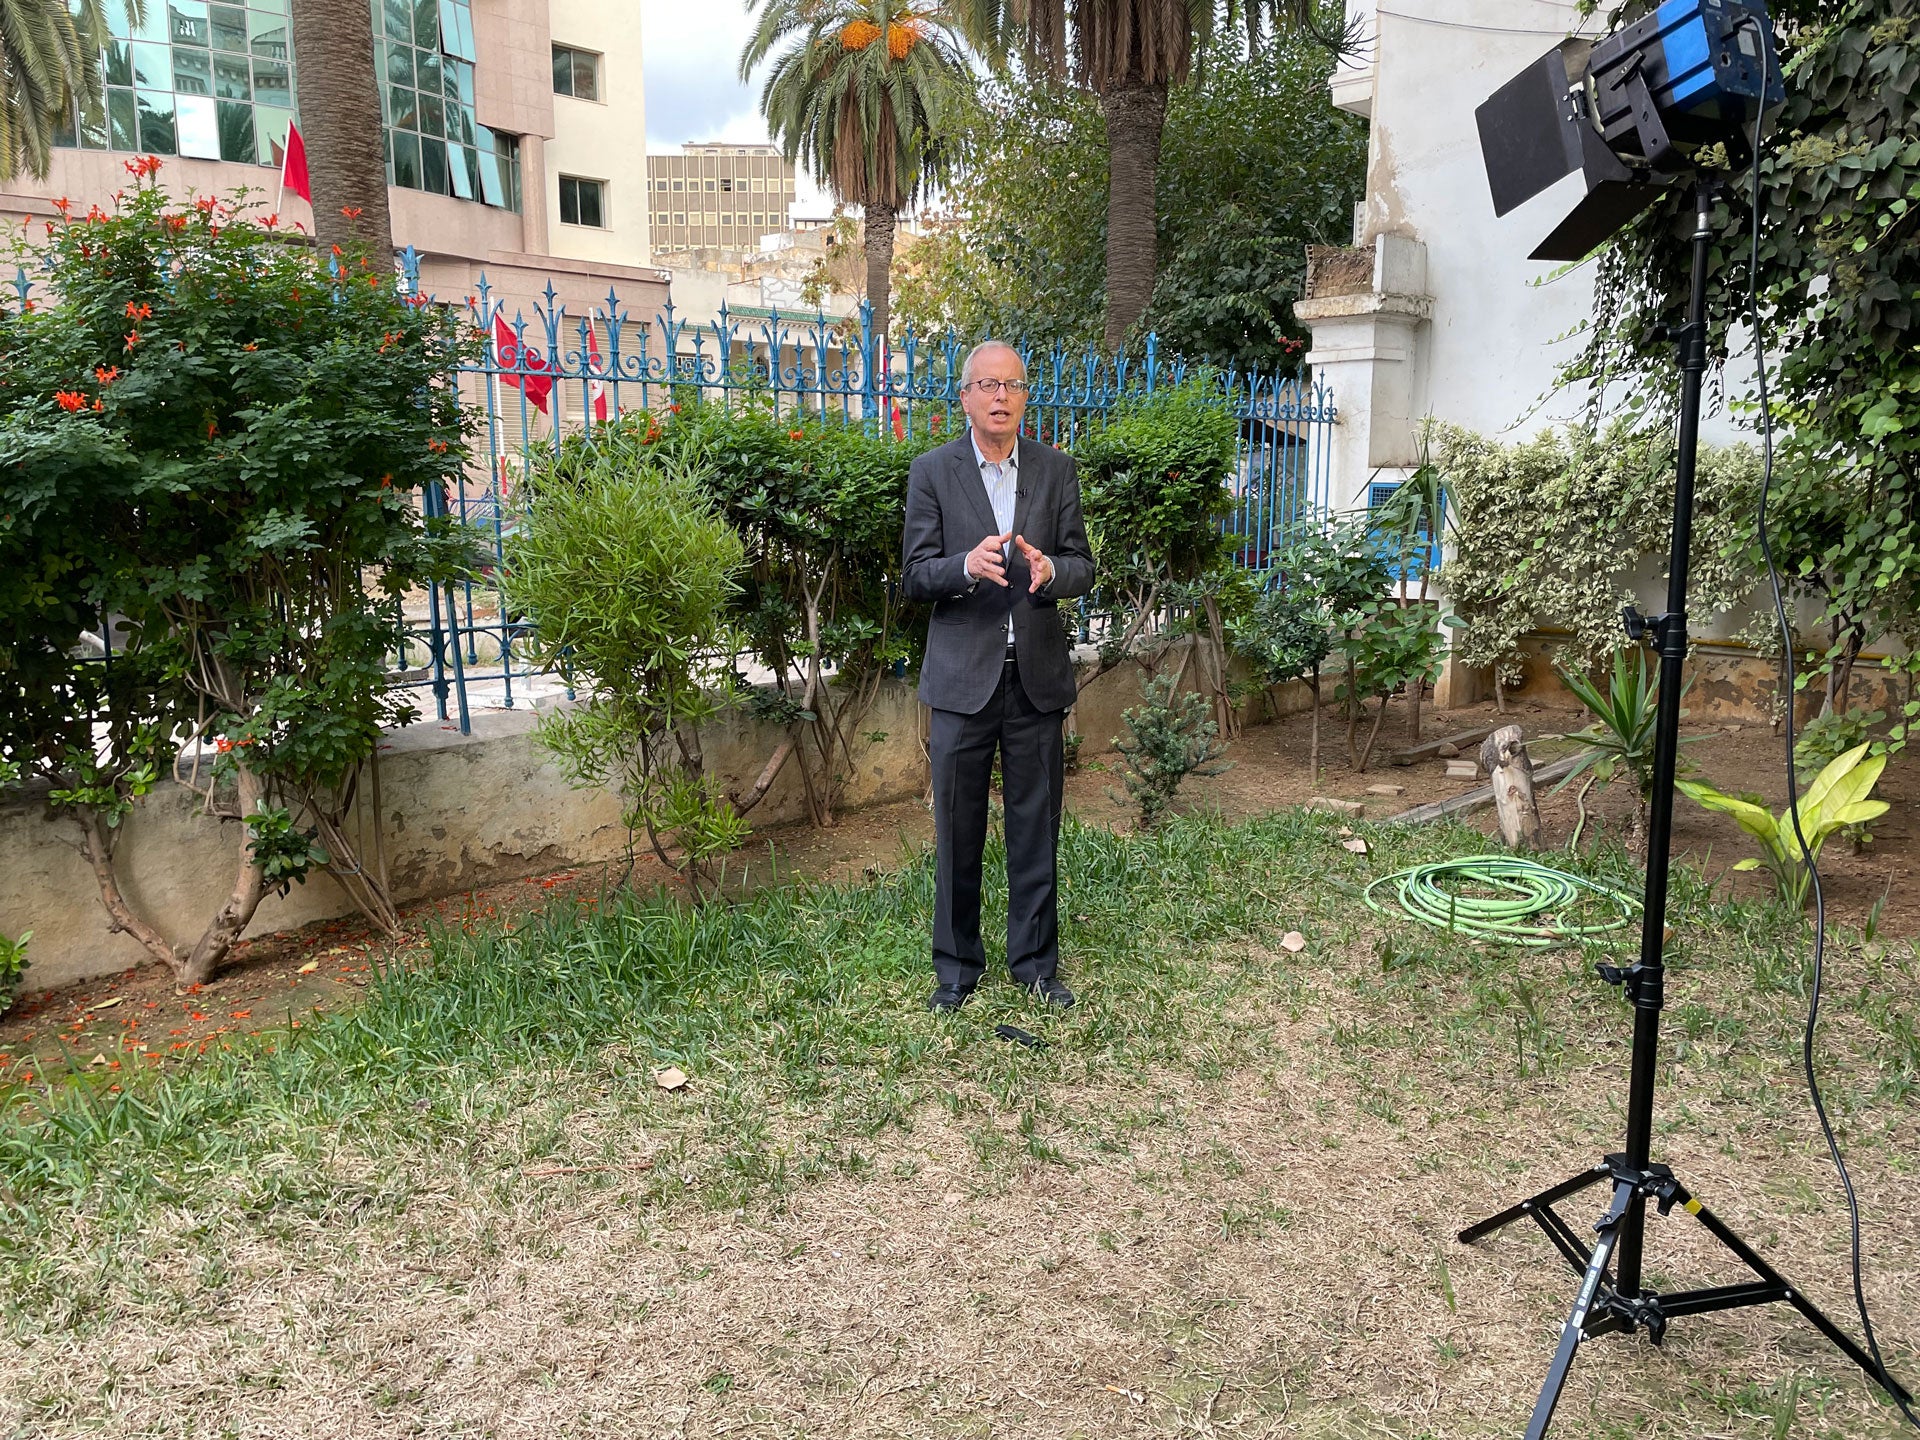 Evicted from their Office, Al Jazeera Works from a Front Yard in Tunisia